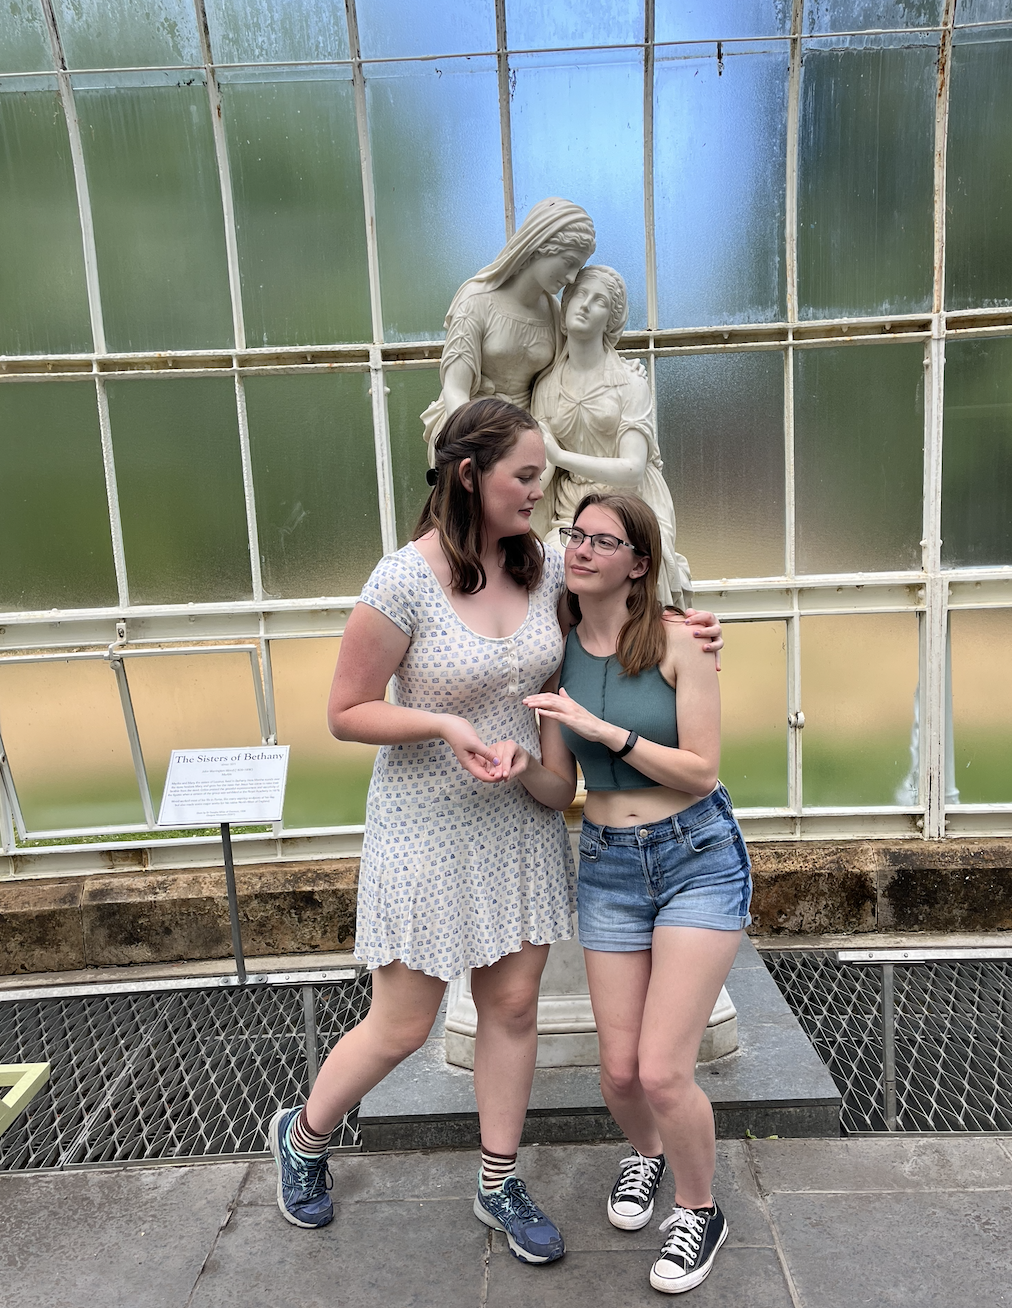 My roommate and I impersonating a statue at the Glasgow Botanical Gardens